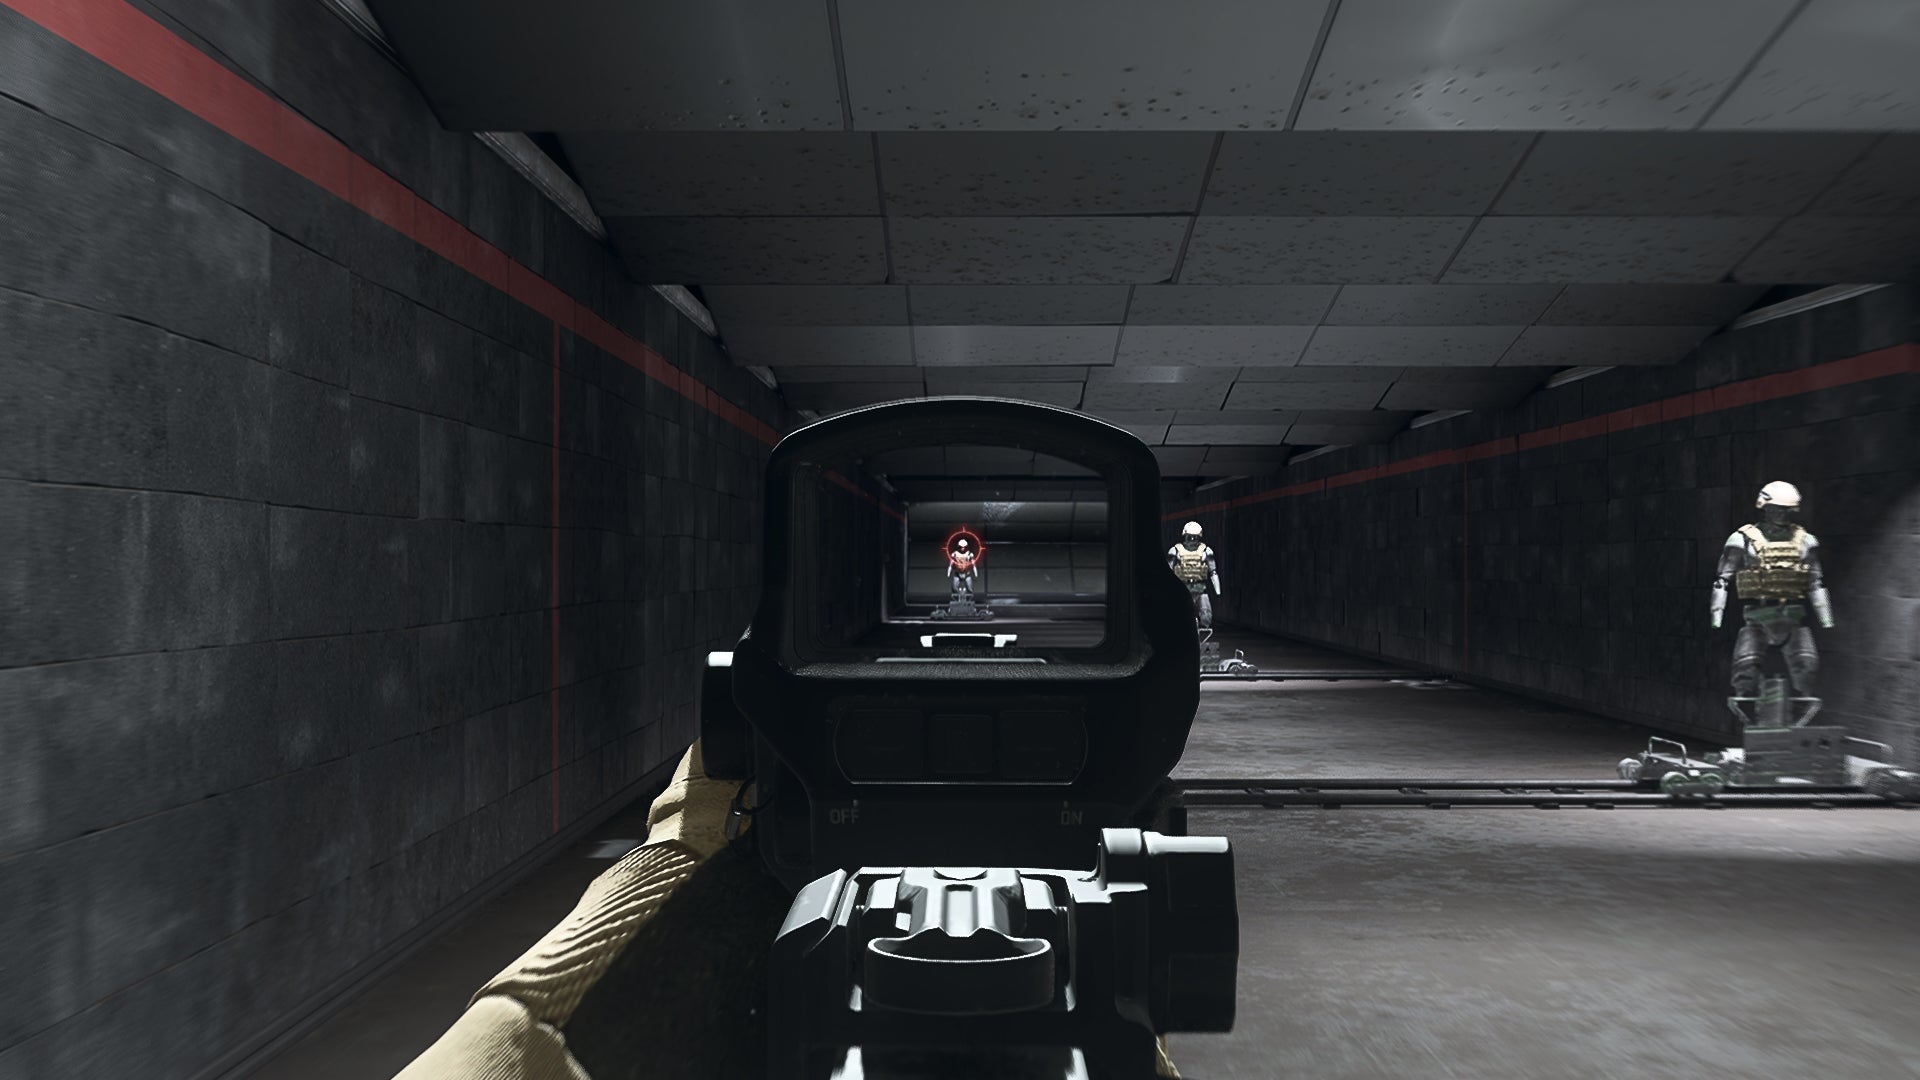 The player in Warzone 2.0 aims at a training dummy using the Corio Enforcer Optic optic attachment.